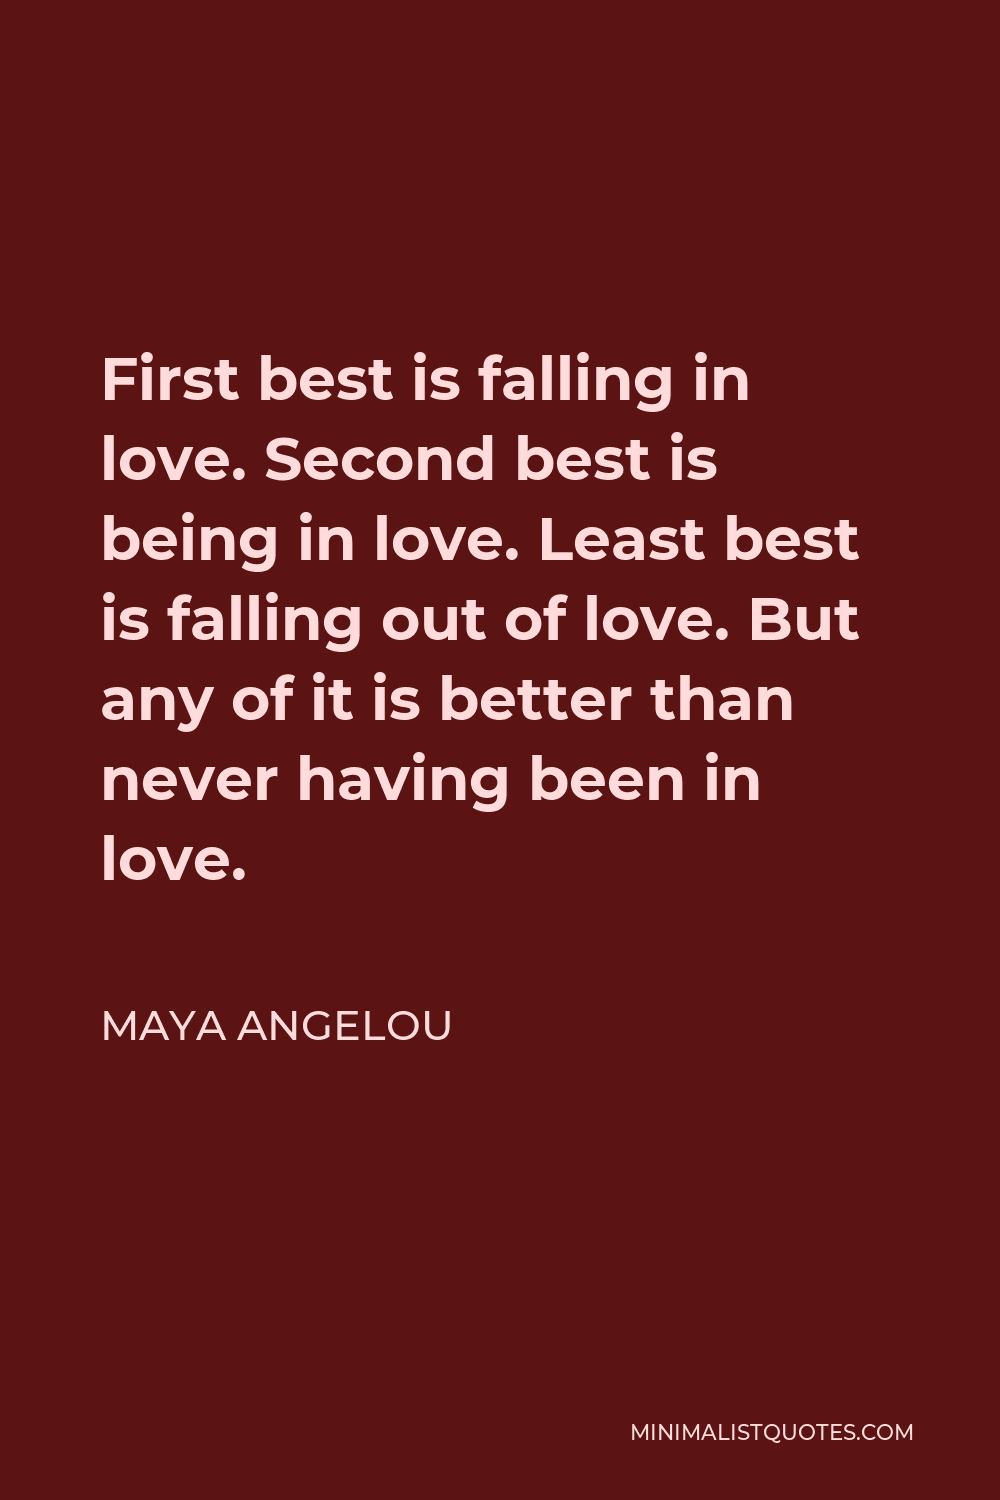 Maya Angelou Quote - First best is falling in love. Second best is being in love. Least best is falling out of love. But any of it is better than never having been in love.